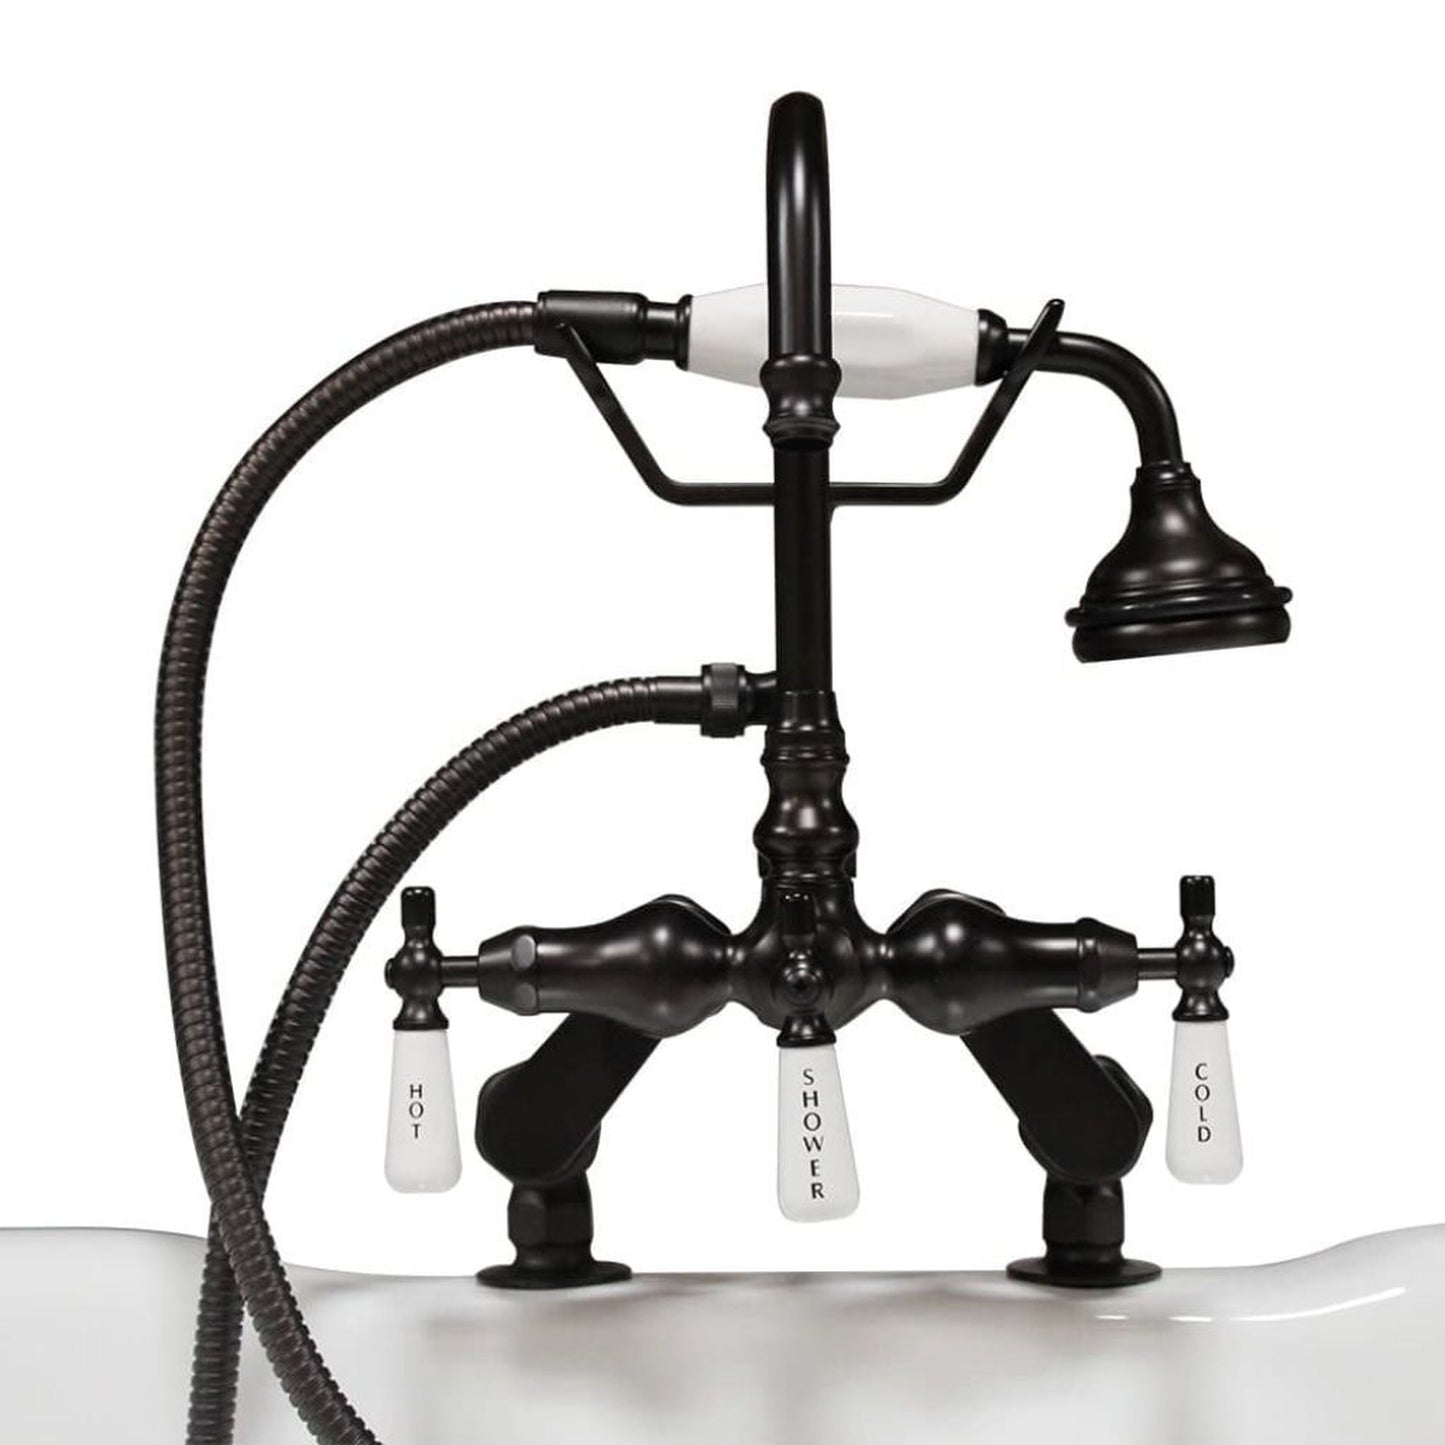 Cambridge Plumbing Oil Rubbed Bronze Deck Mount Porcelain Lever English Telephone Brass Faucet With Hand Held Shower